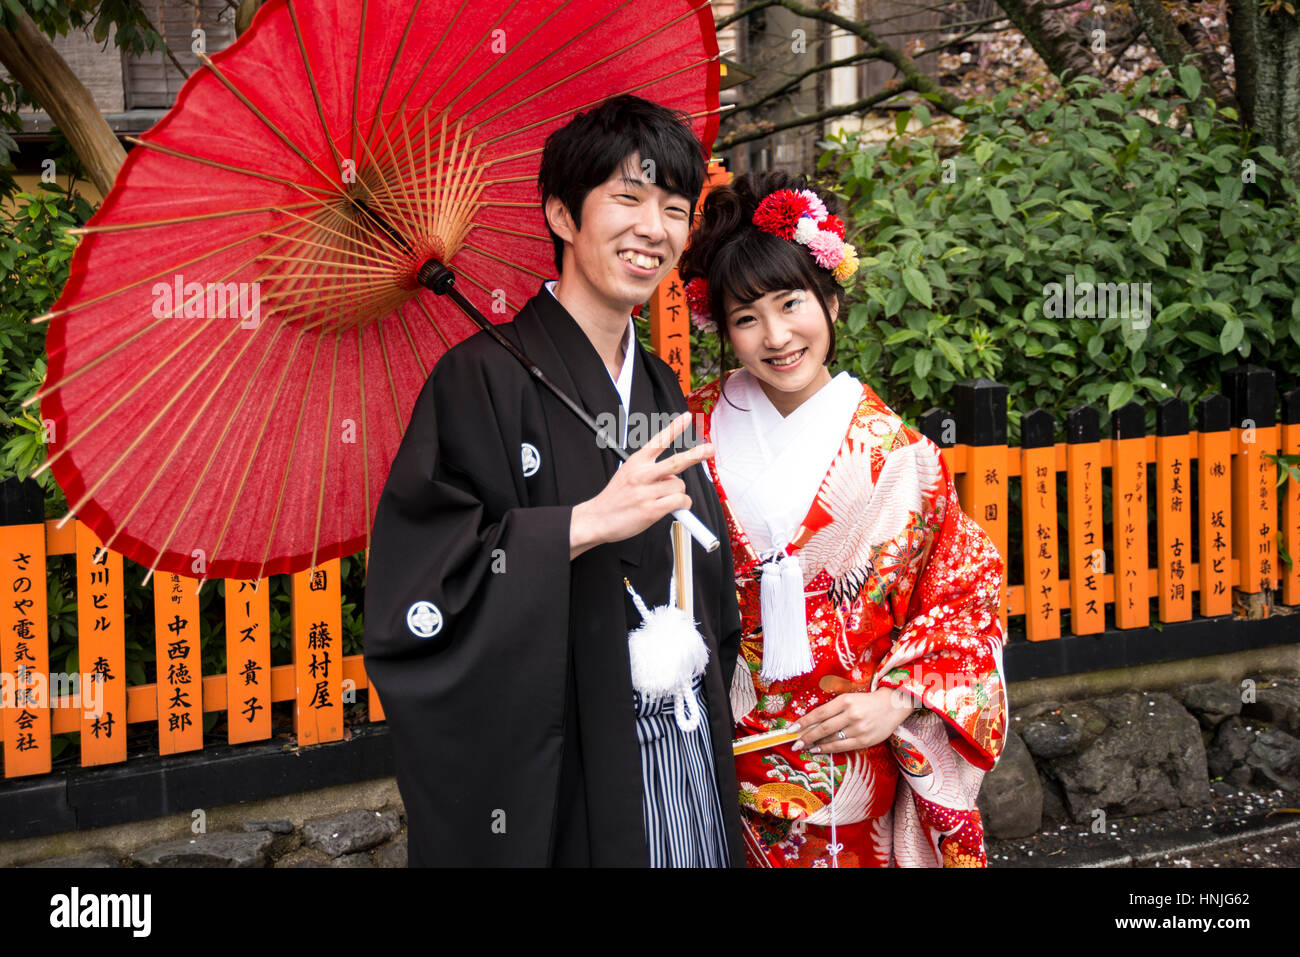 Newly weded young couple in traditional Japanese wedding attire posing